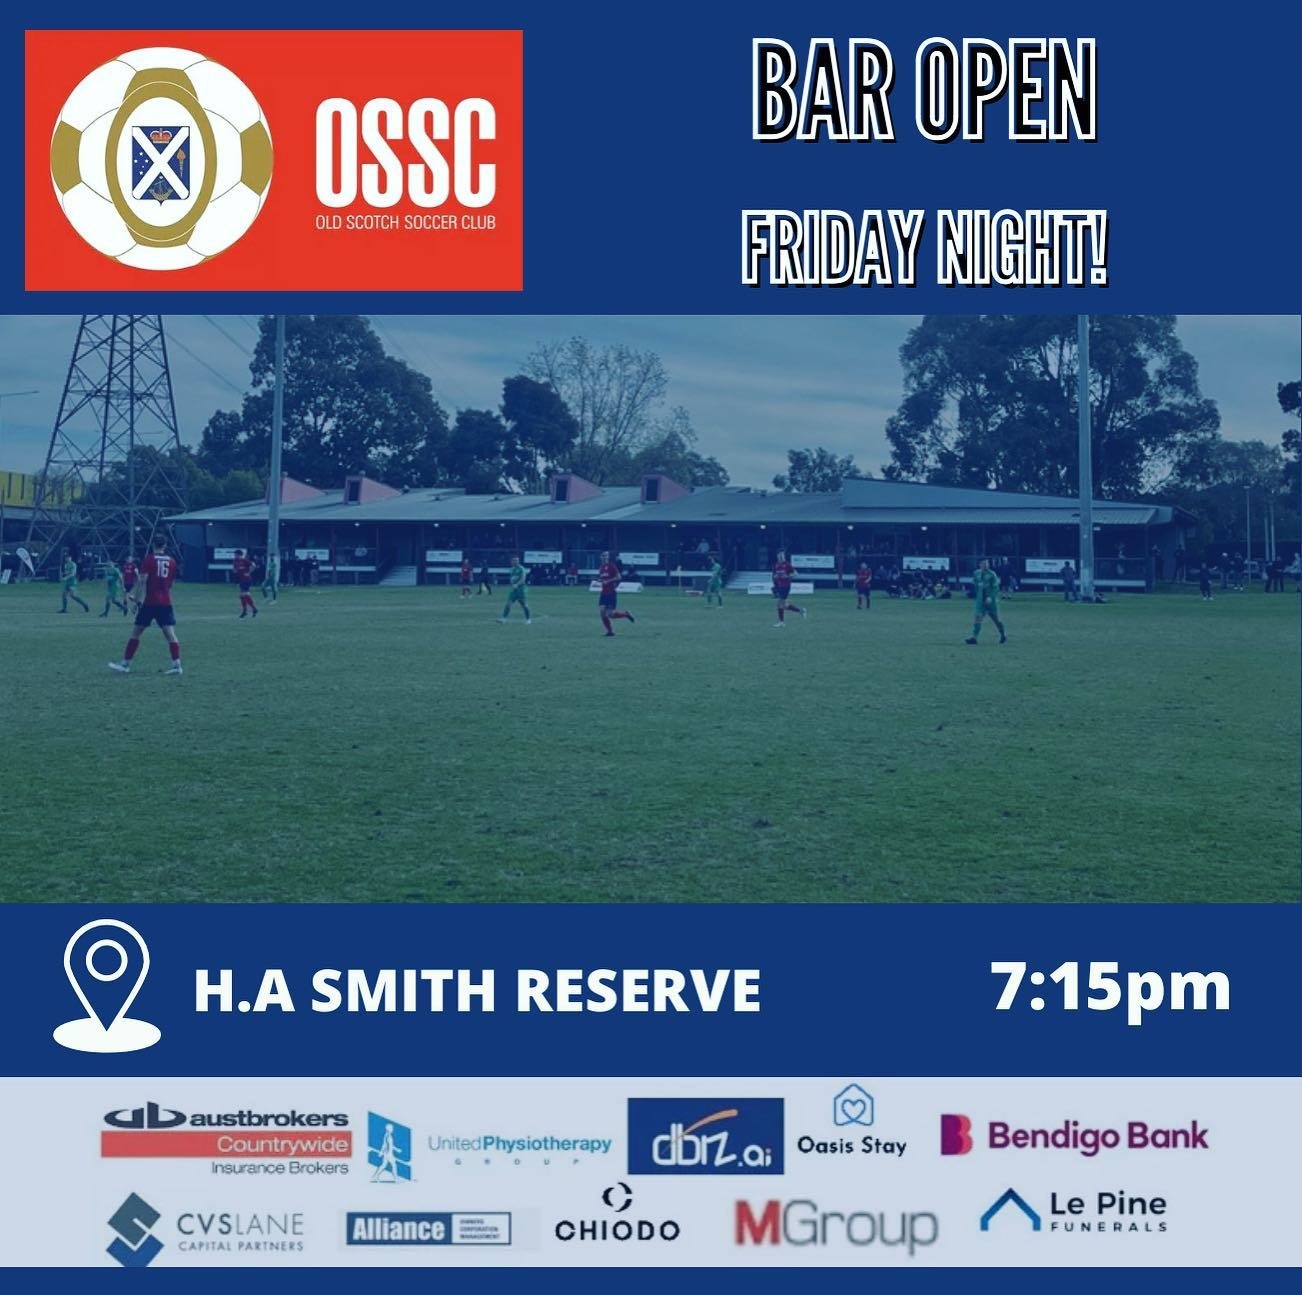 Friday night at the club! The bar will be open! 

Come for good company and beverages. The over 35&rsquo;s will be there! ⚽️

See you there!